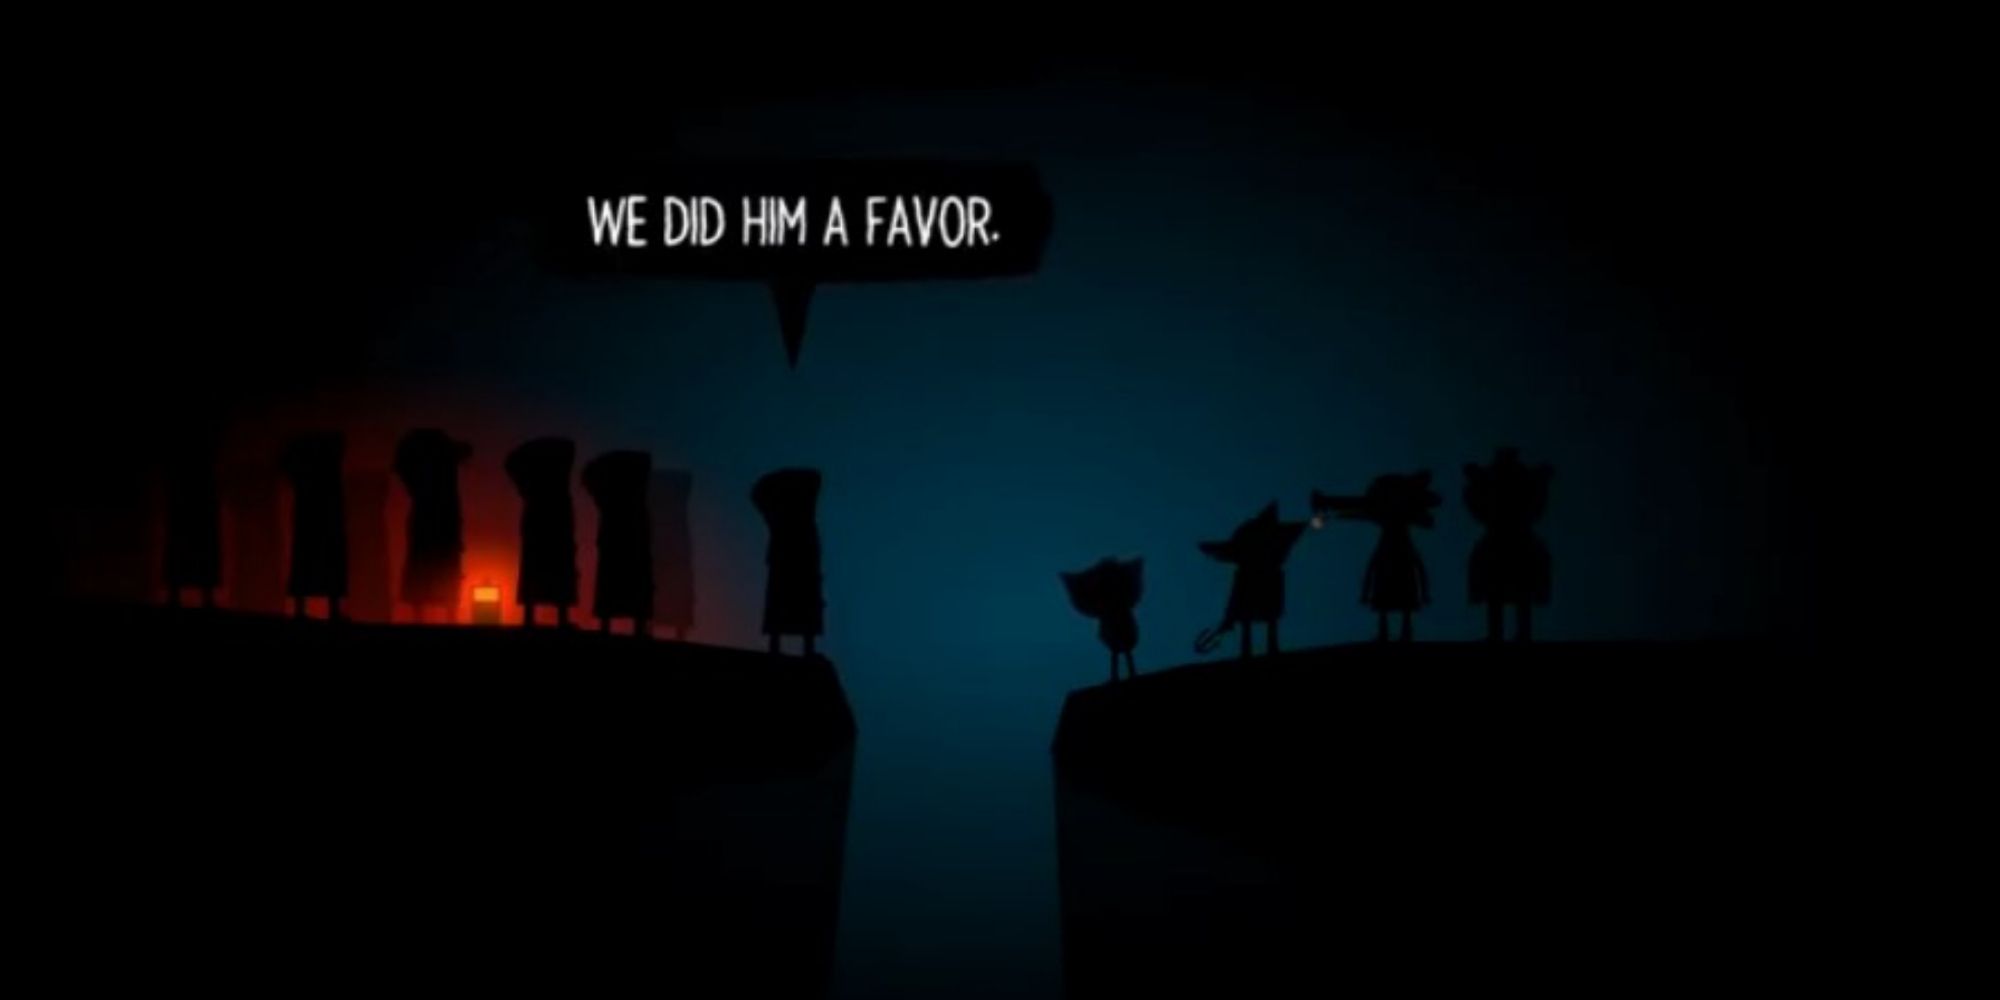 The cult saying "We did him a favor." in Night in the Woods.